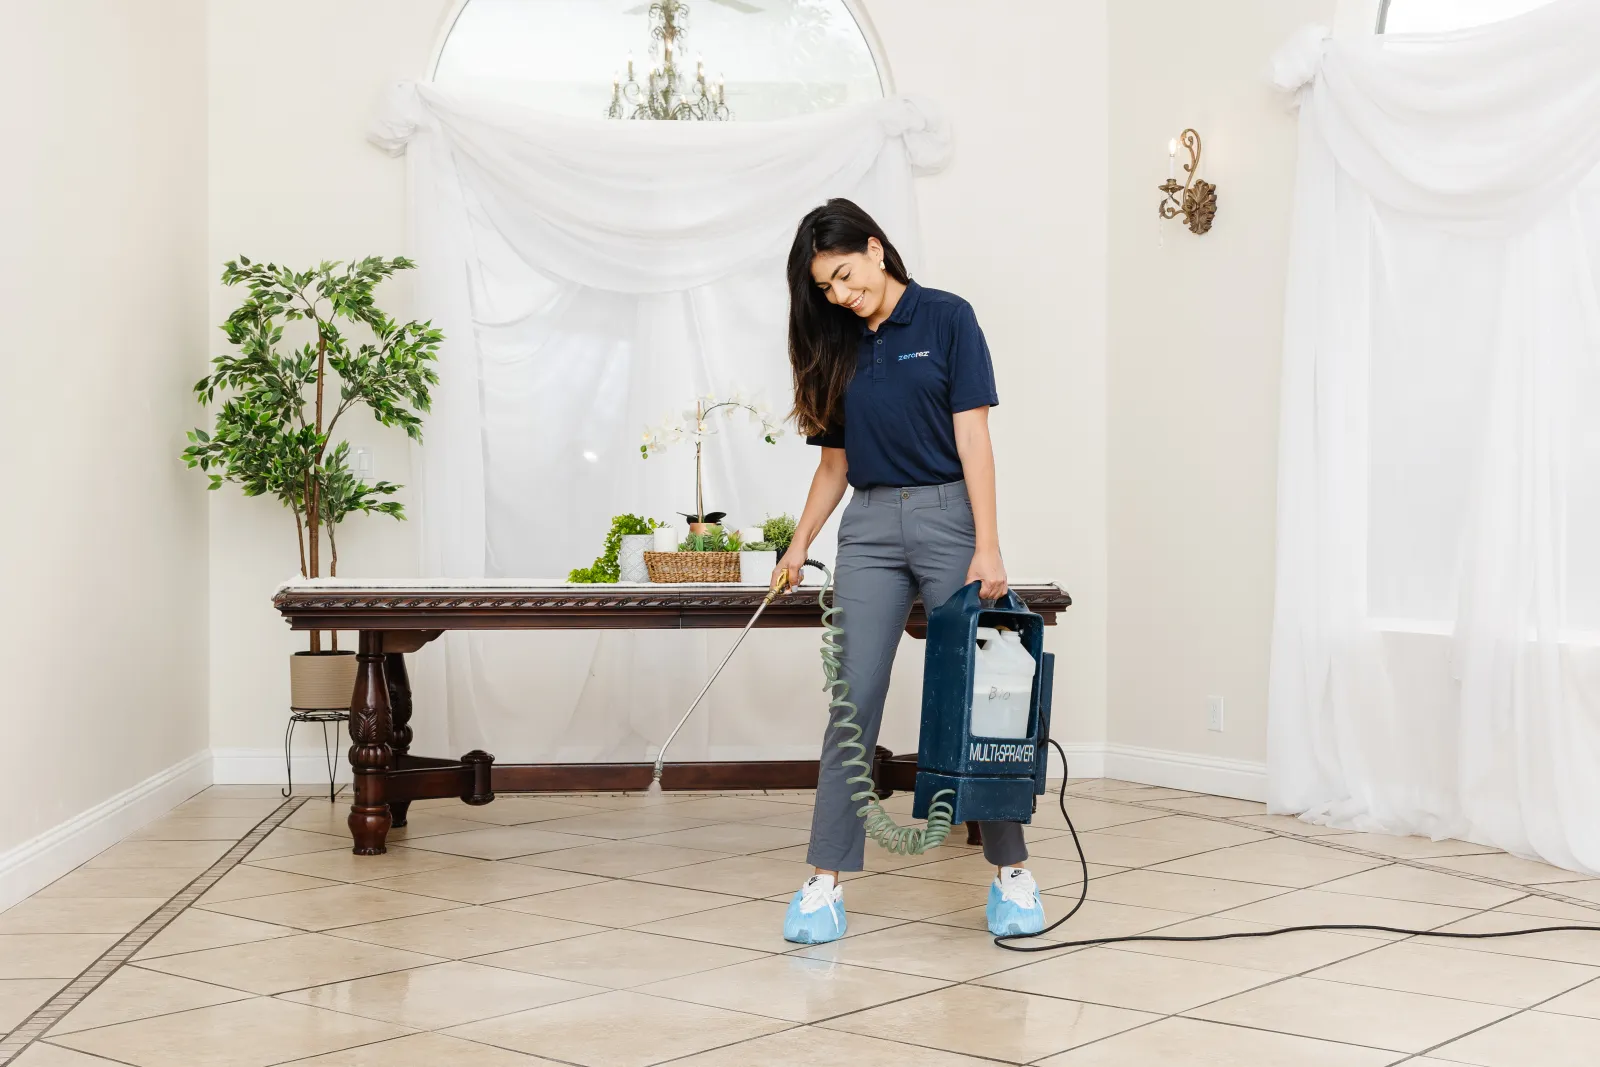 female Zerorez® technician spraying a pre-treatment spray to a porcelain tile floor to clean it with the proper cleaning products